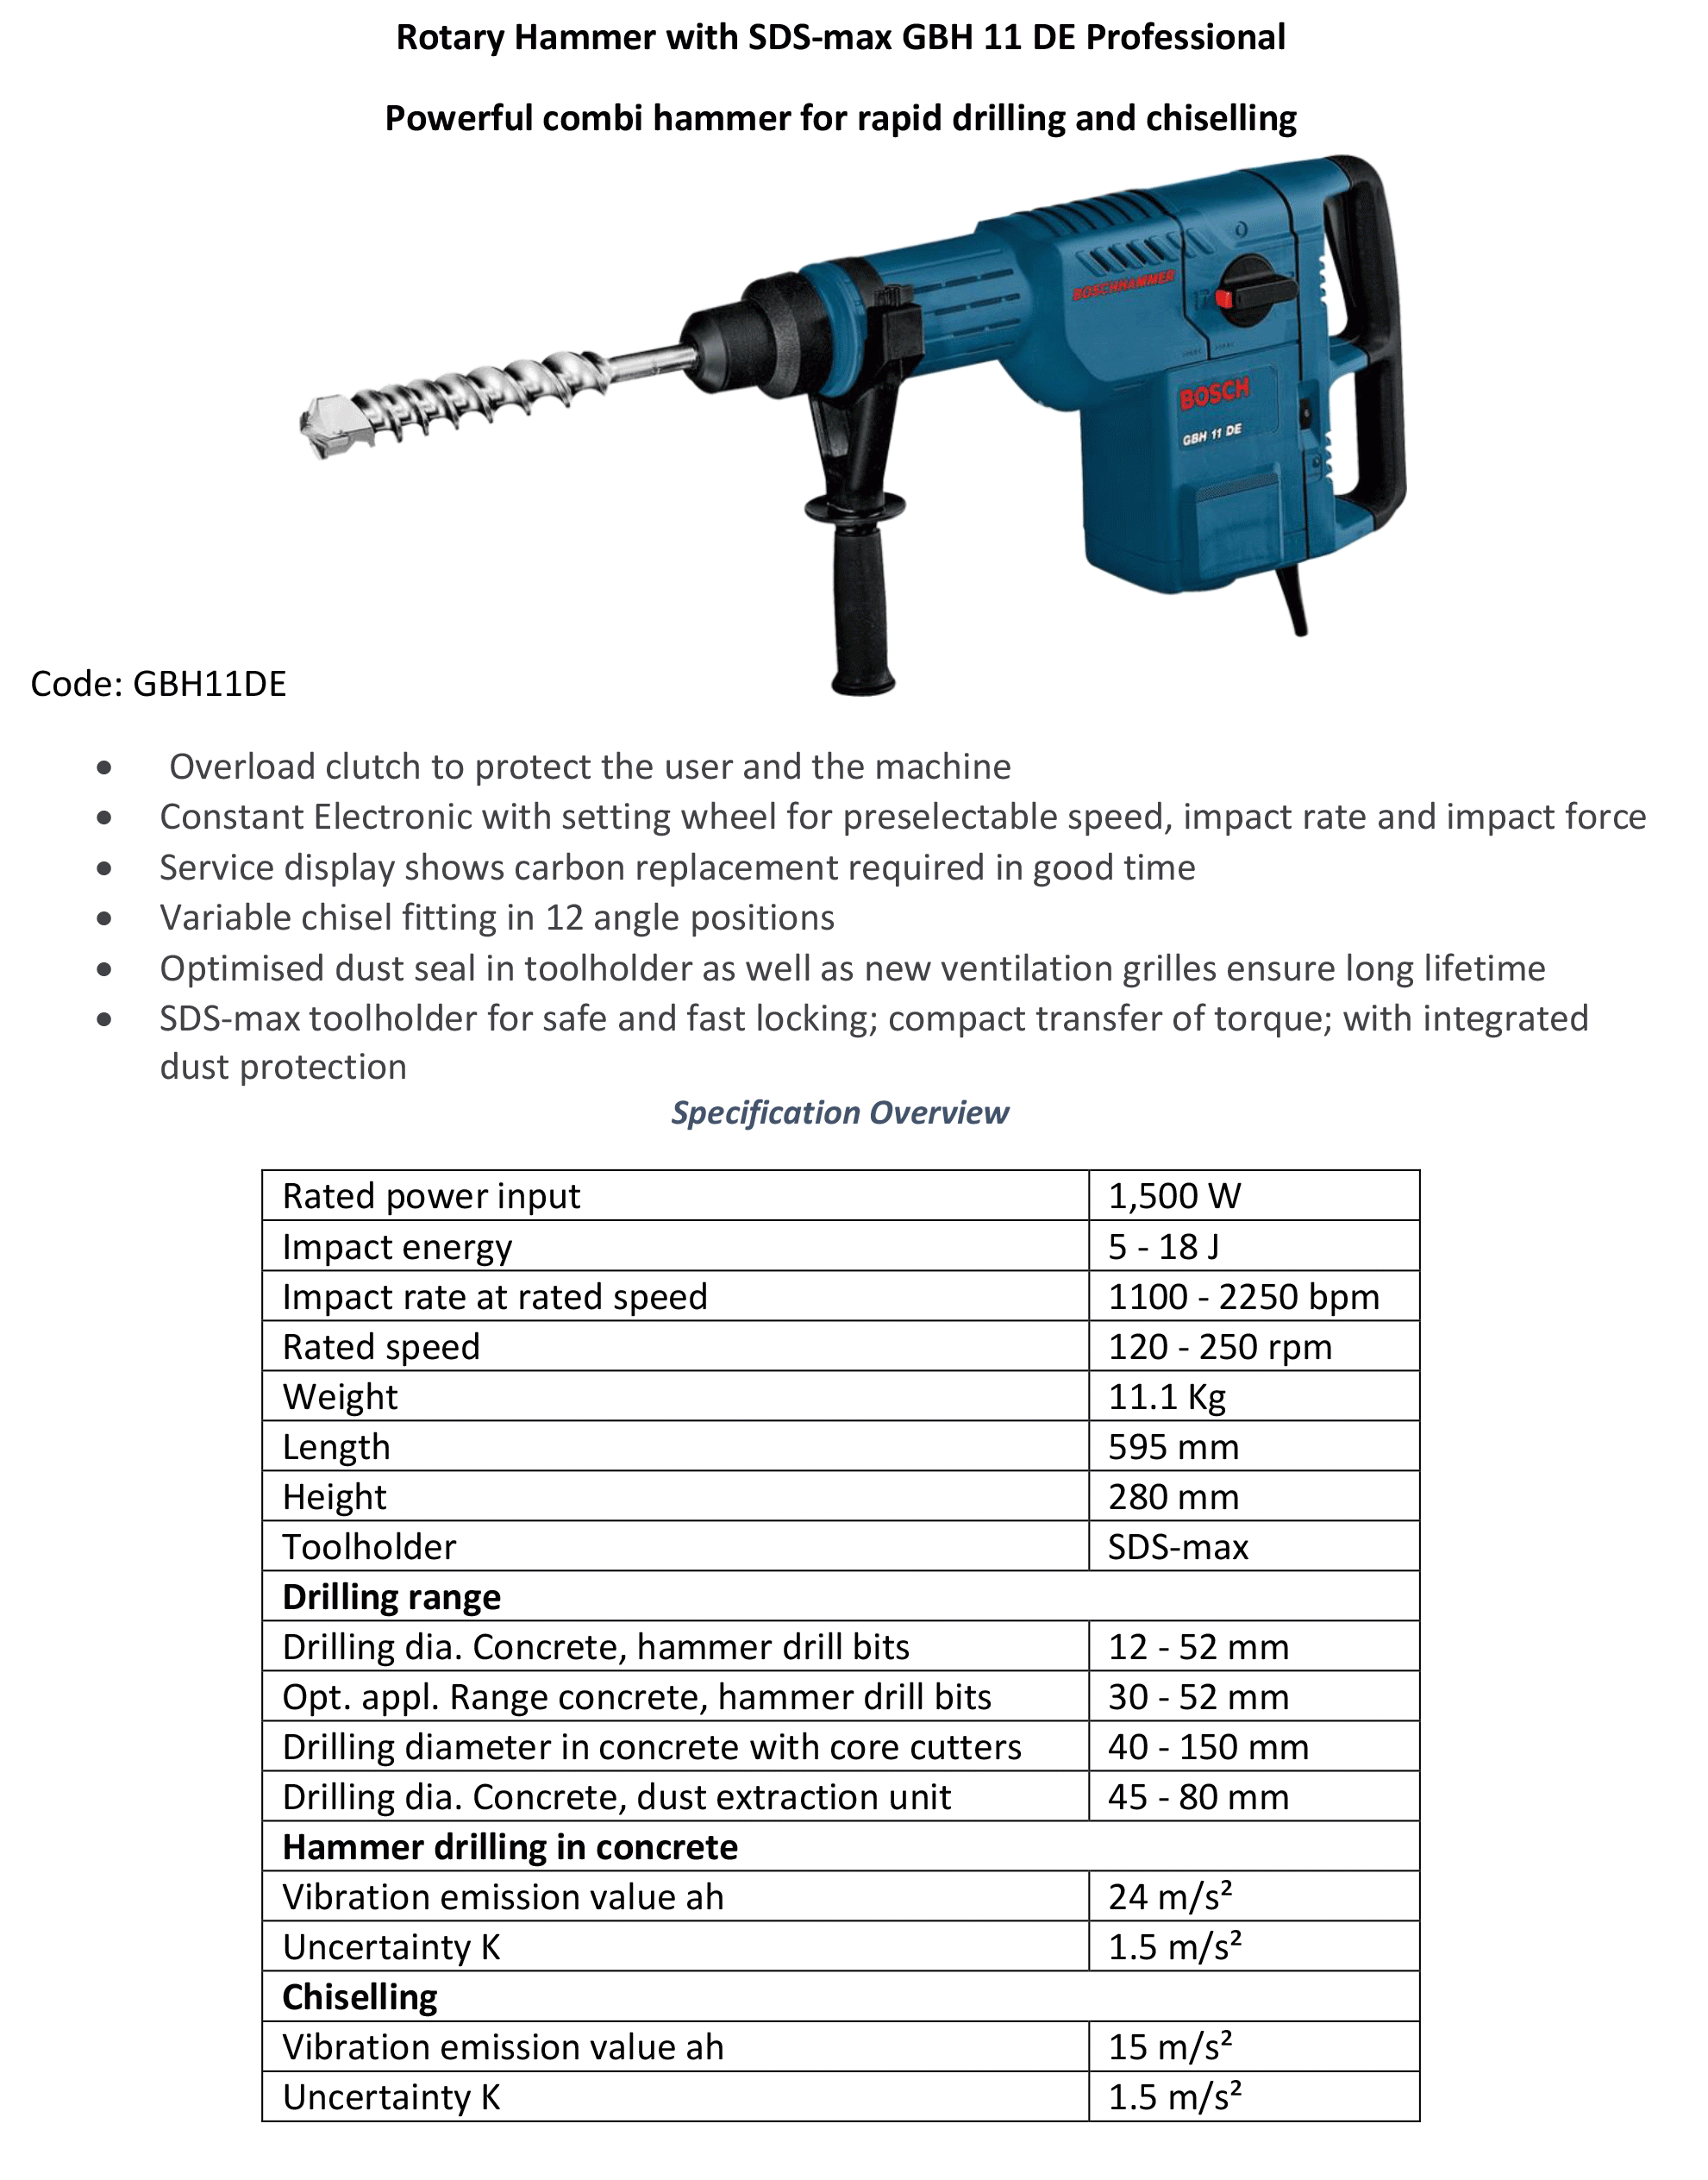 Rotary-Hammer-with-SDS-plus-GBH-11-DE-in